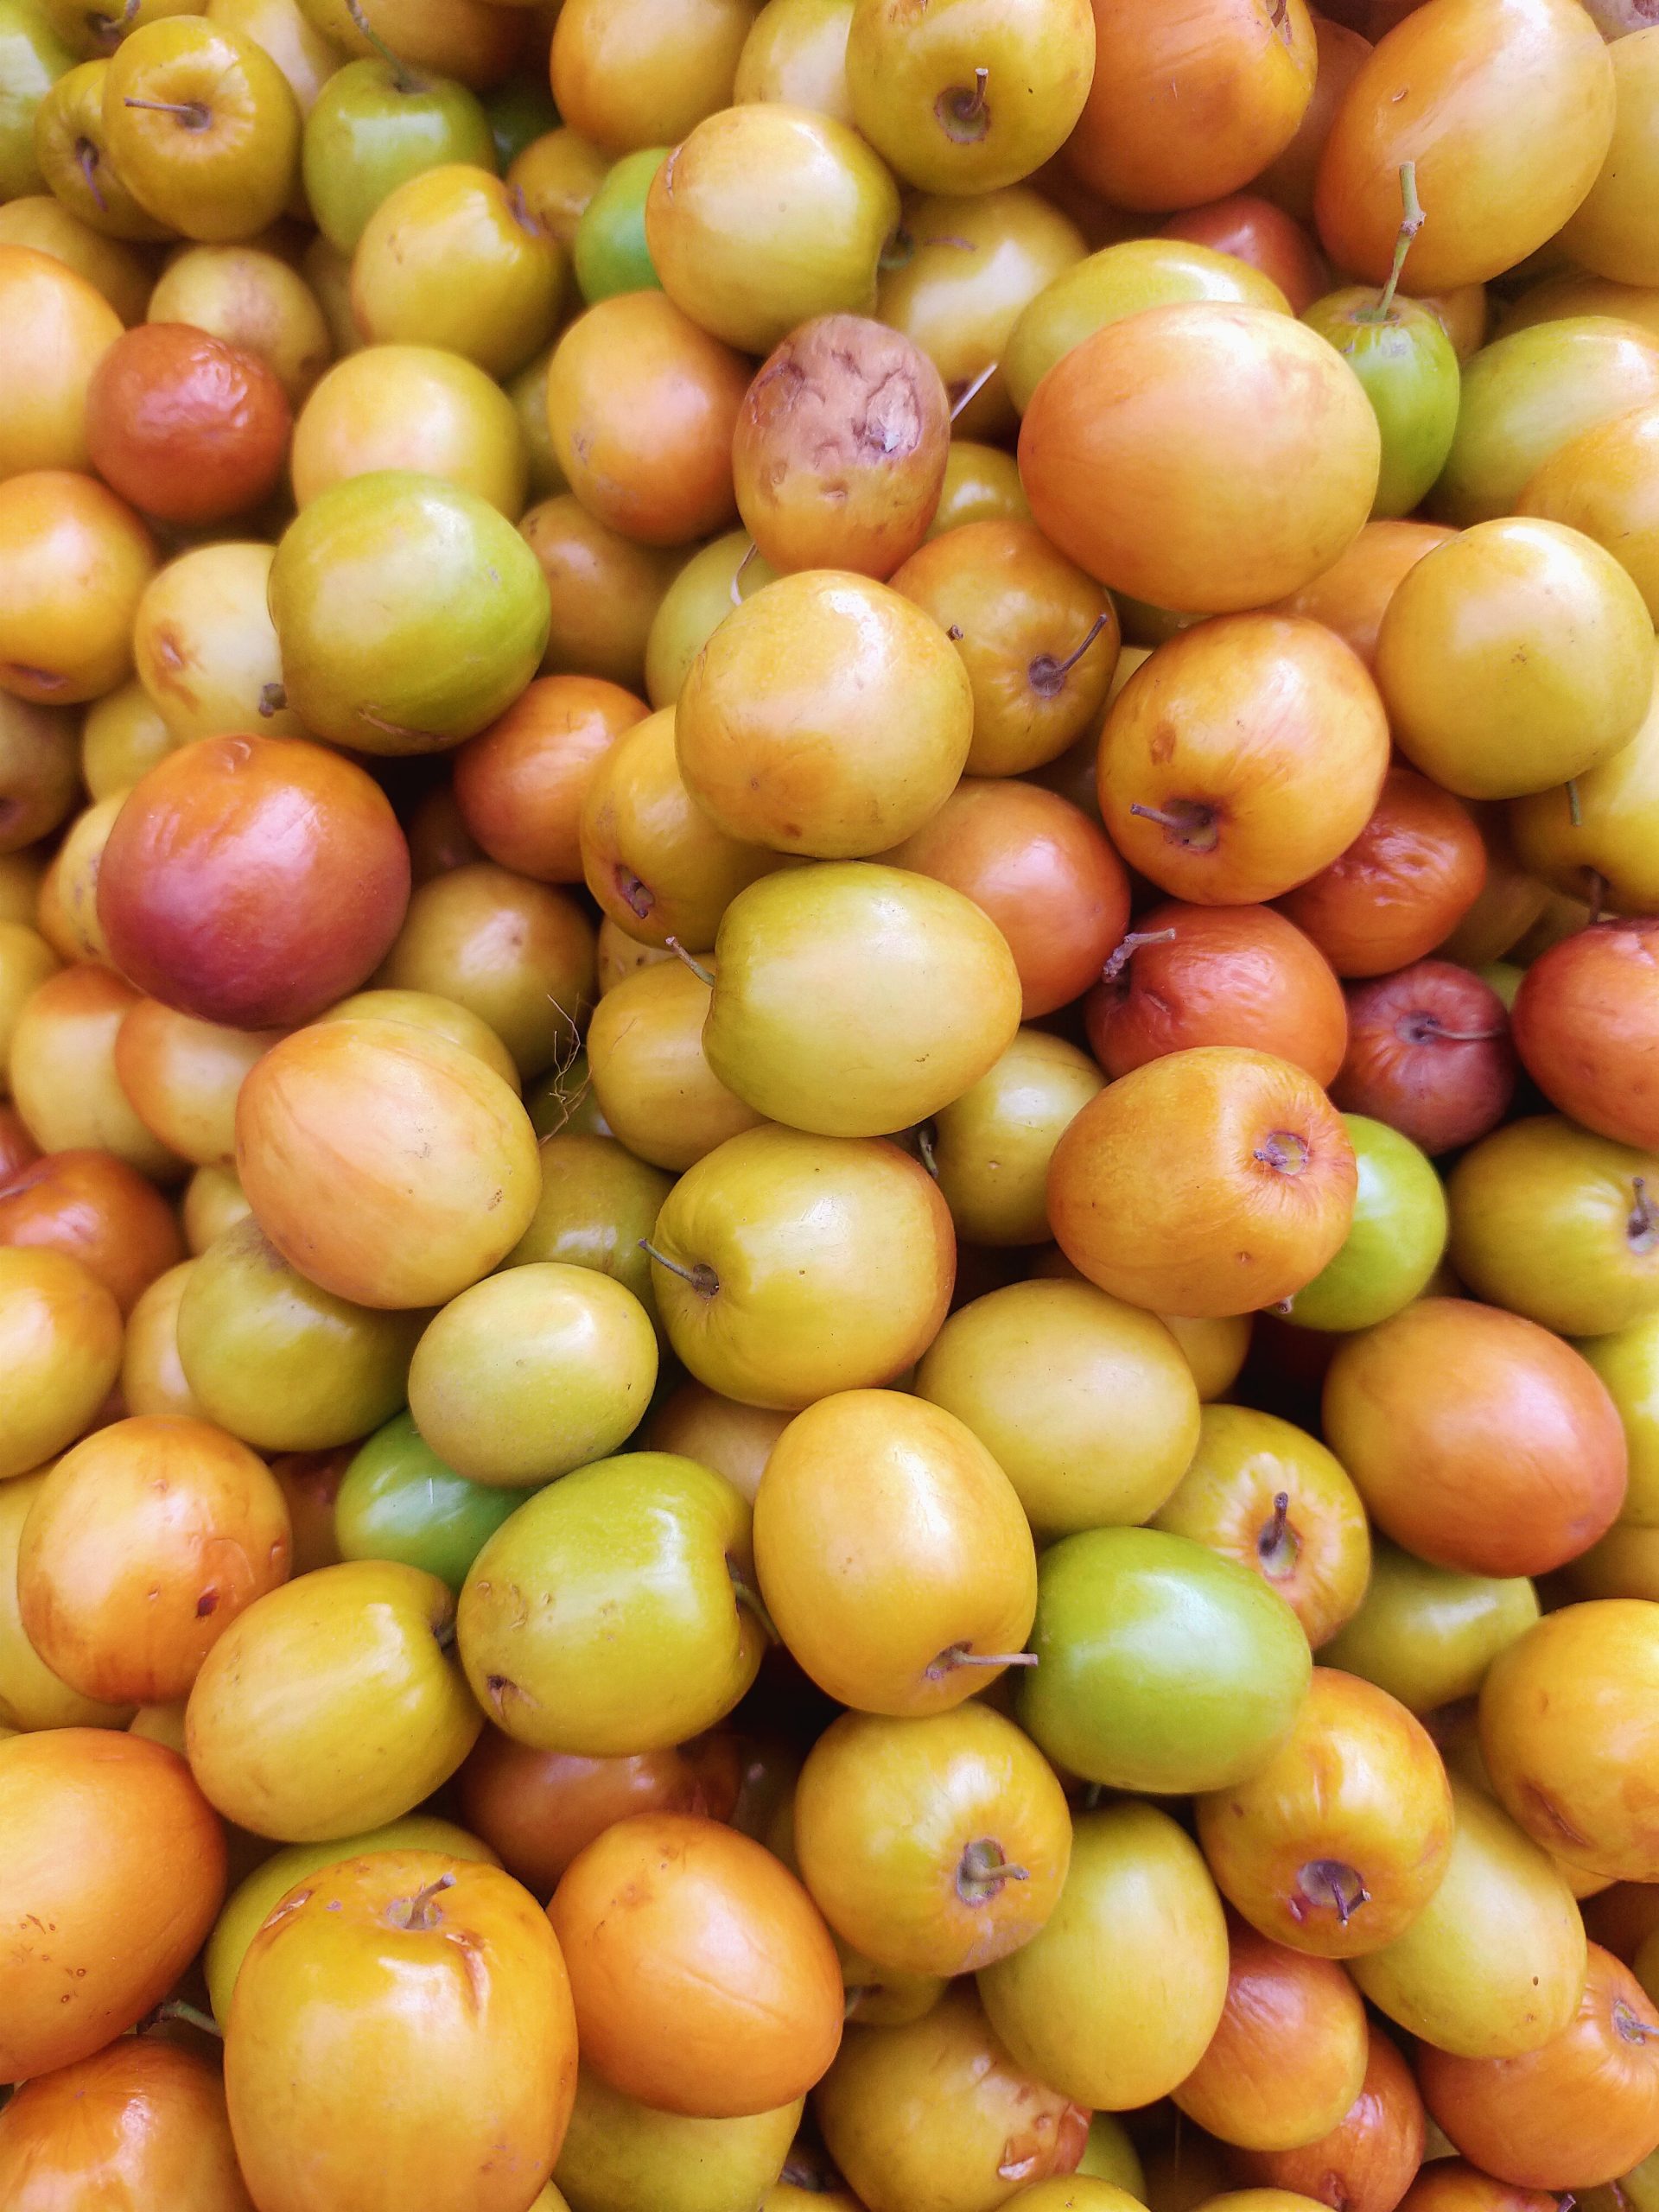 A pile of jujube berries